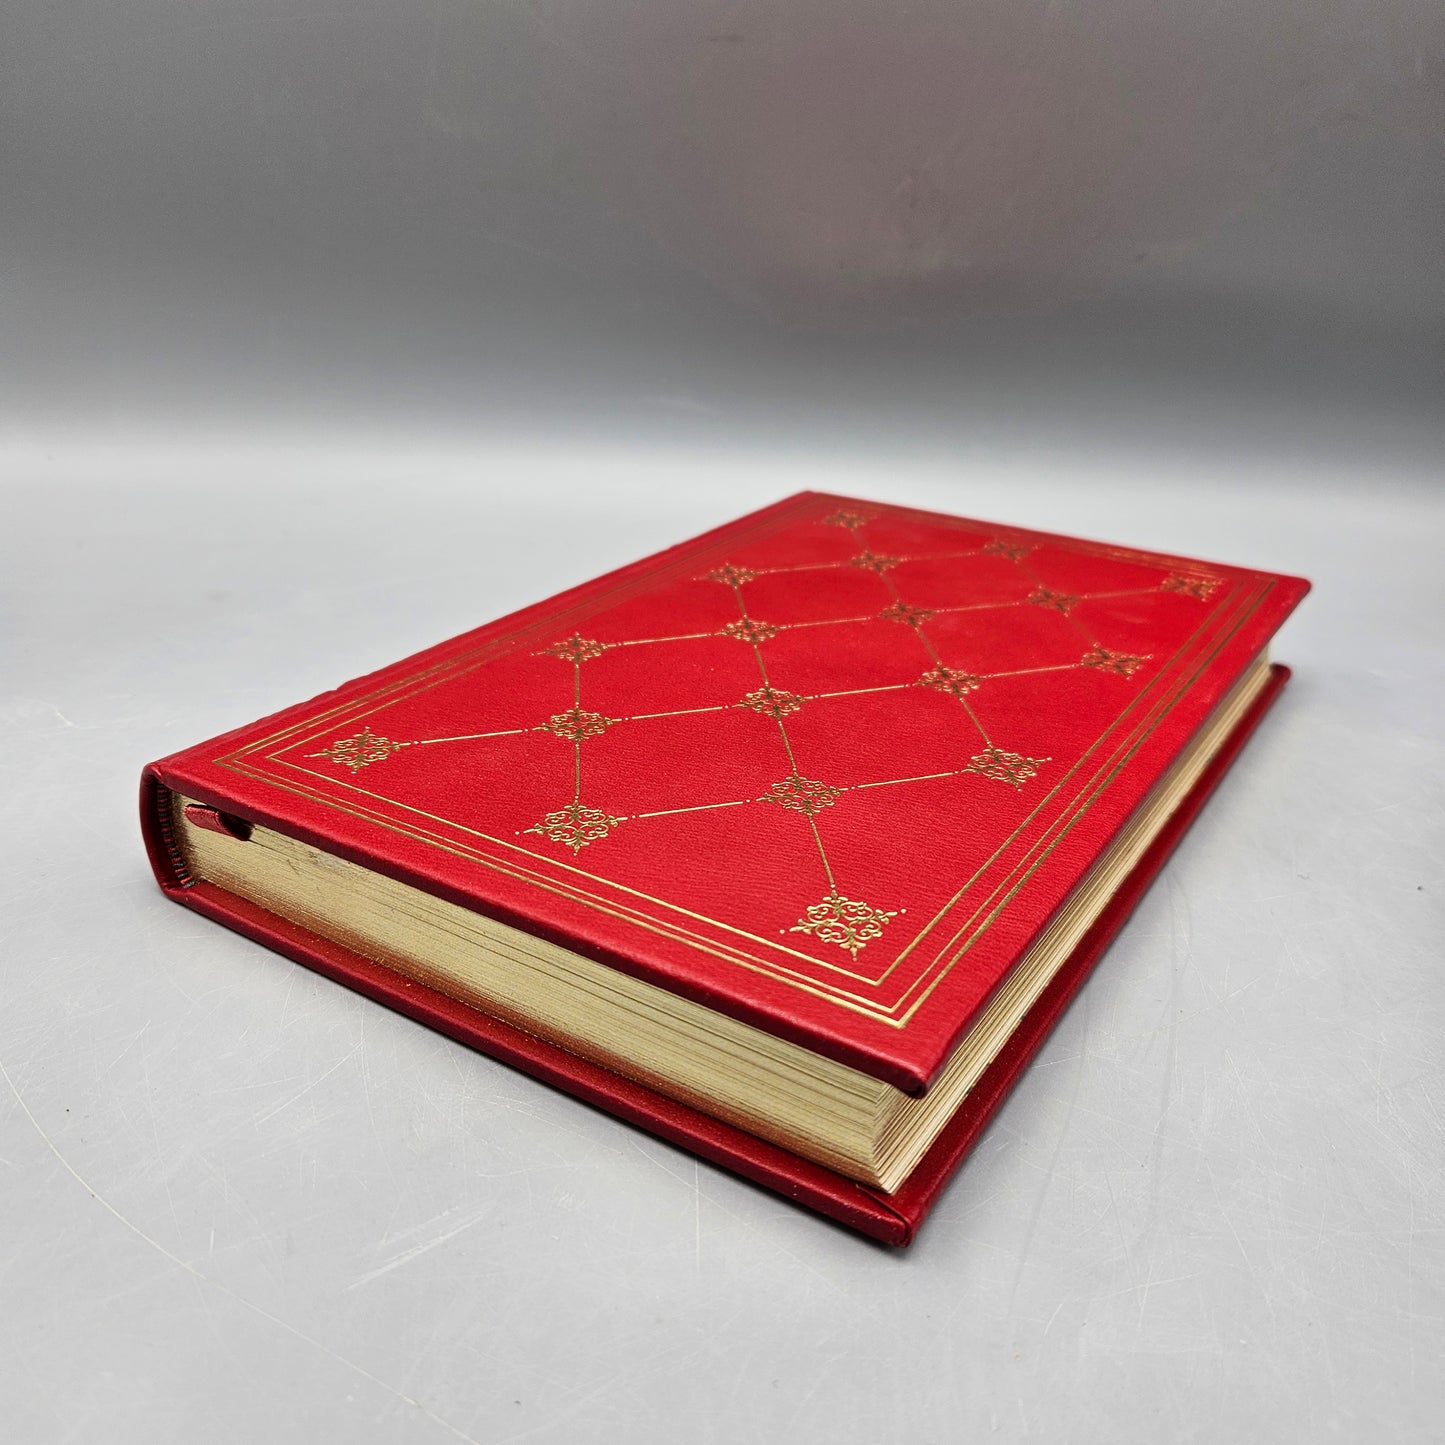 Leatherbound Book - Alison Lurie "Foreign Affairs" Signed First Edition Franklin Library